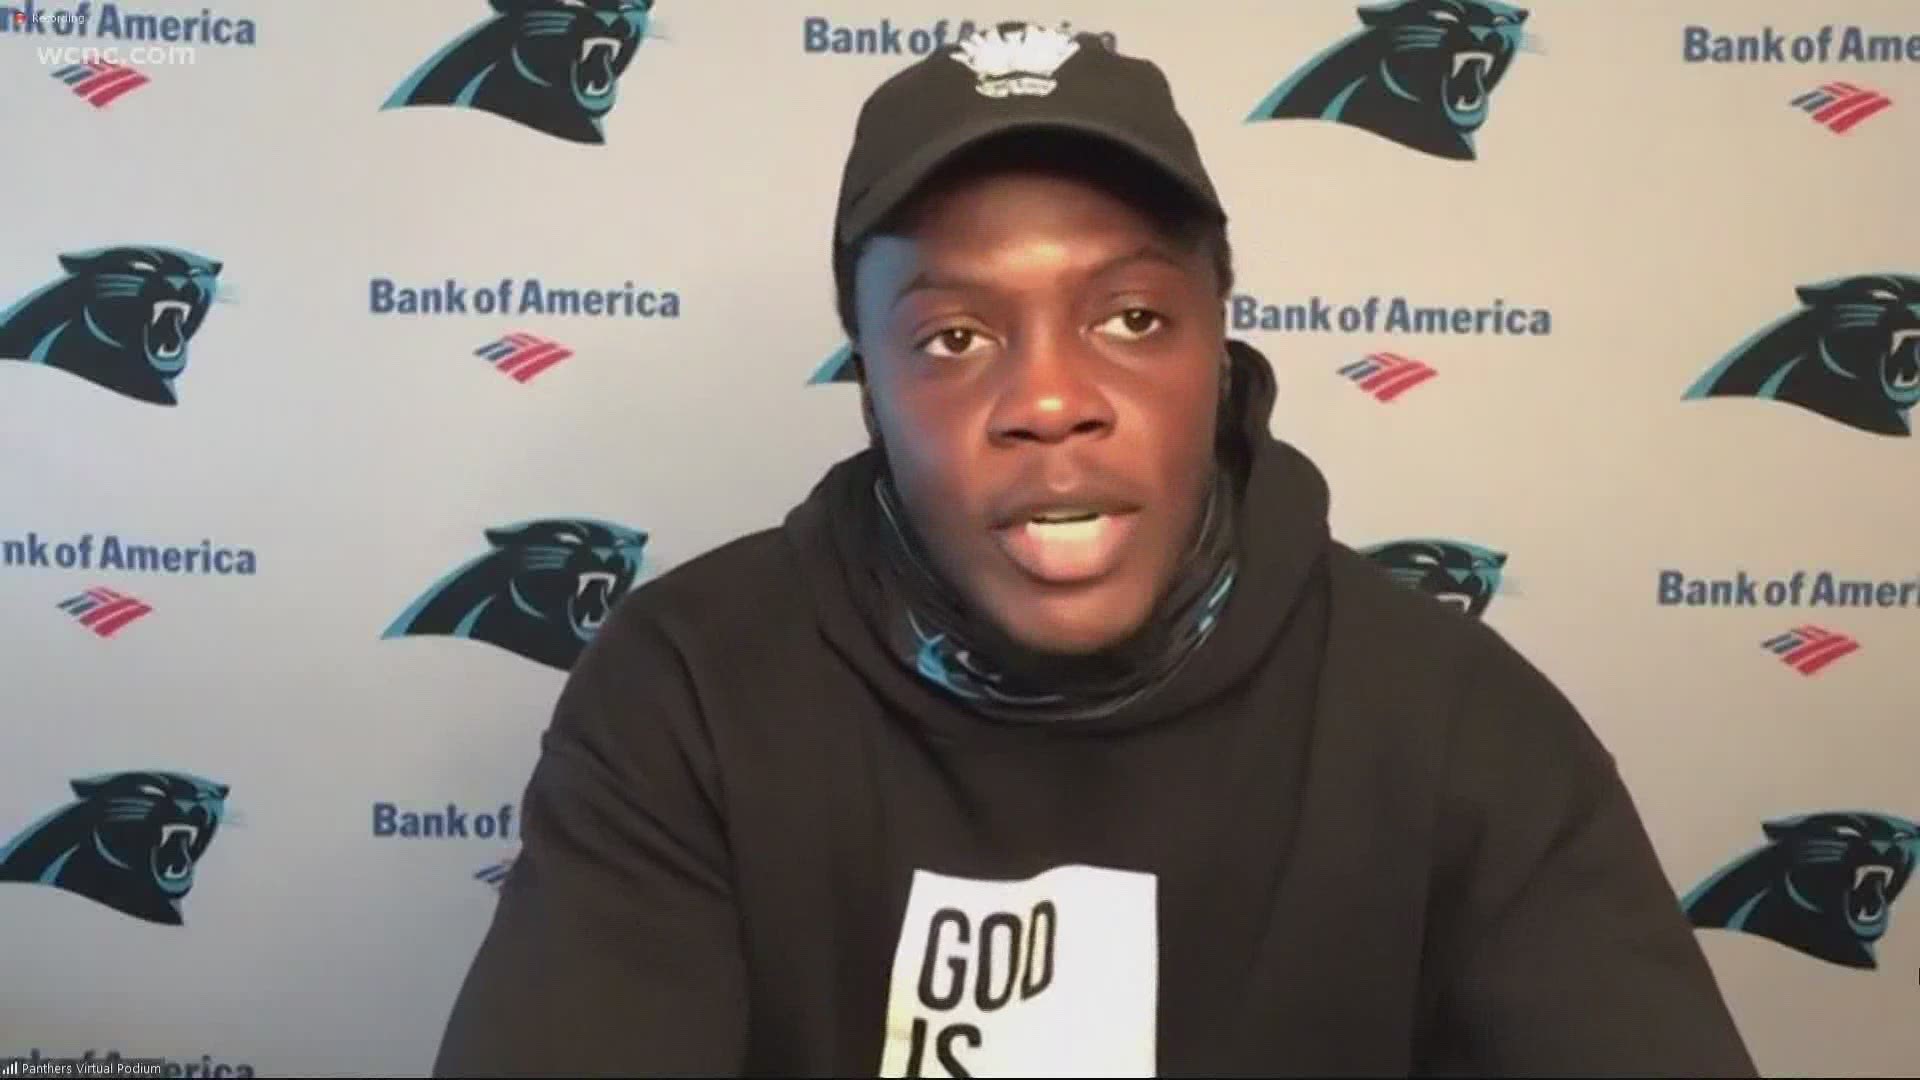 Teddy Bridgewater said he feels 'honored' to follow in the position Cam Newton left behind, and he believes in his own ability to be a part of the team.